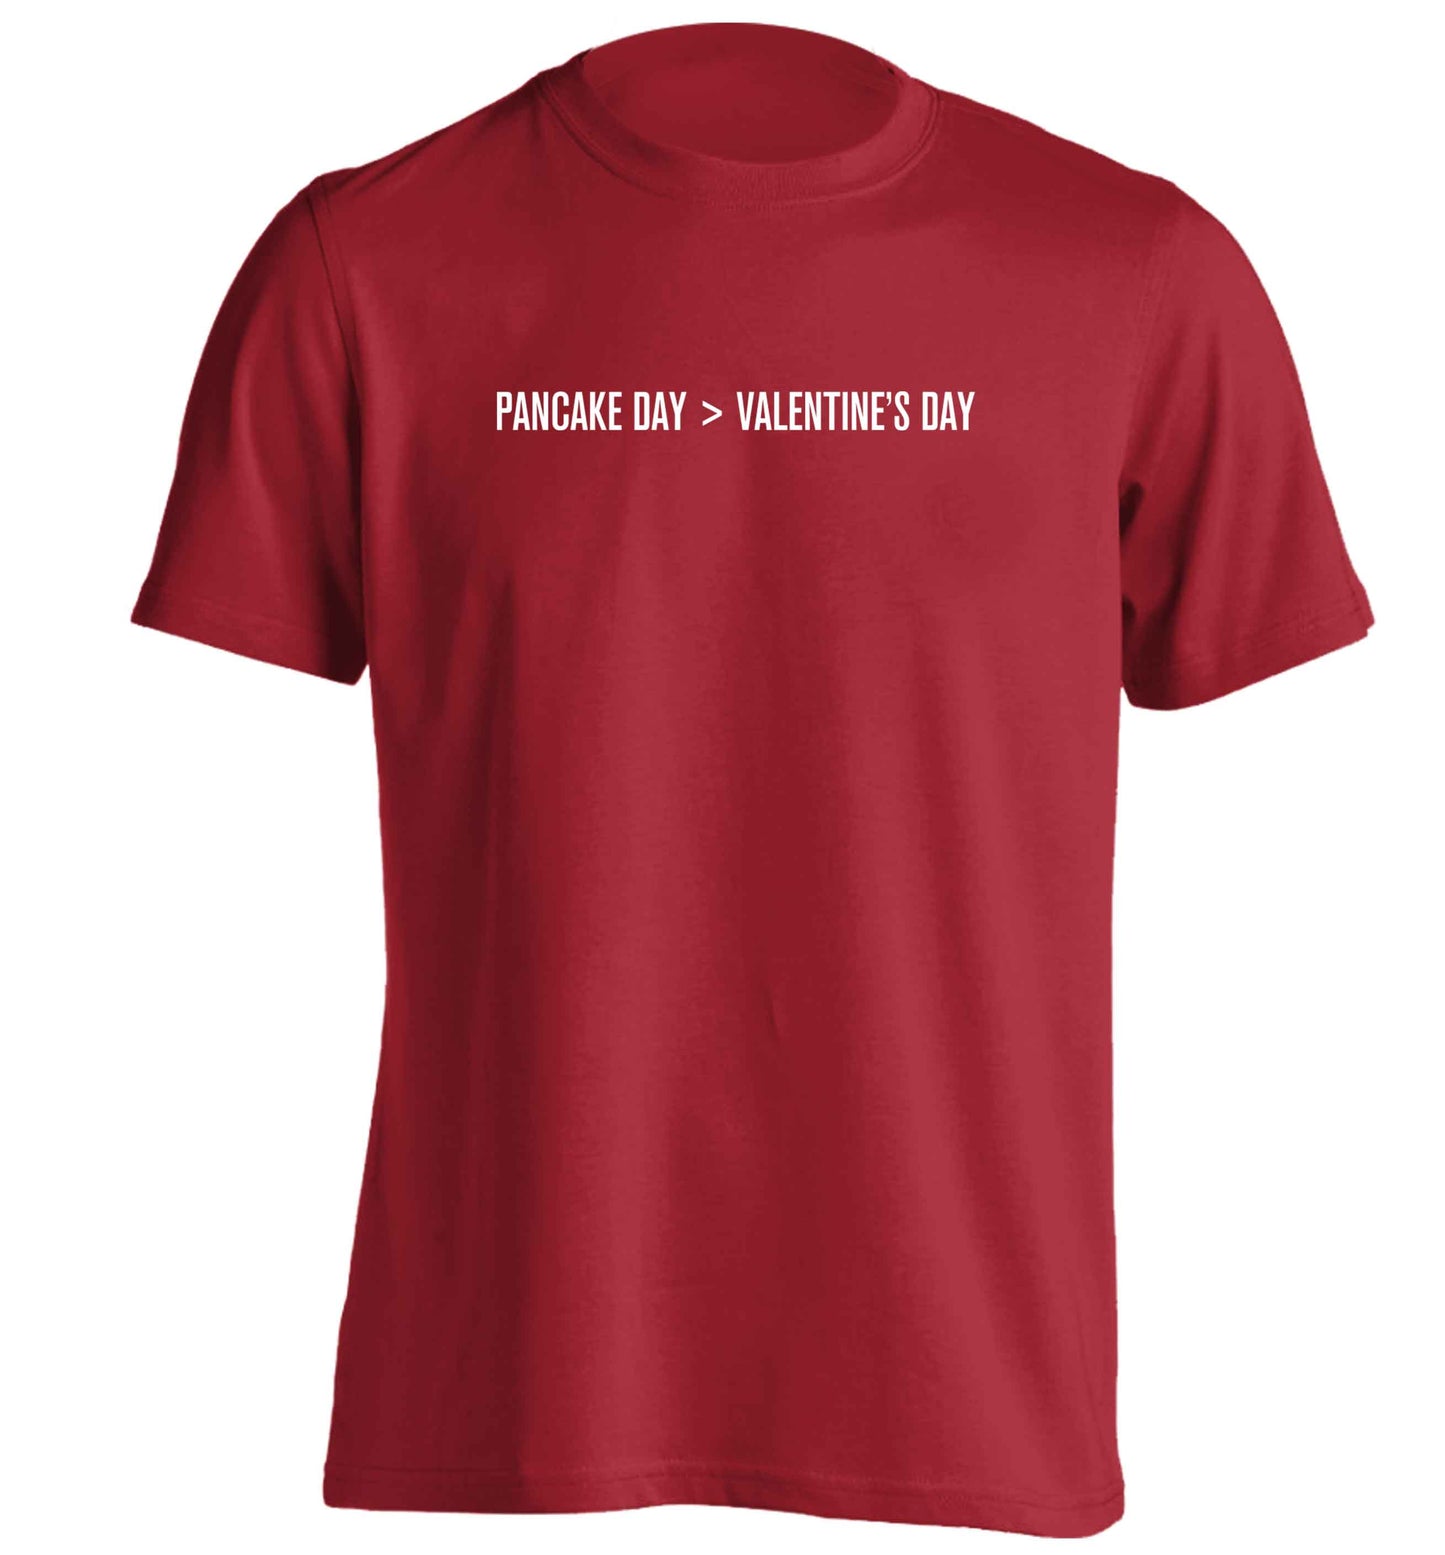 Pancake day > valentines day adults unisex red Tshirt 2XL